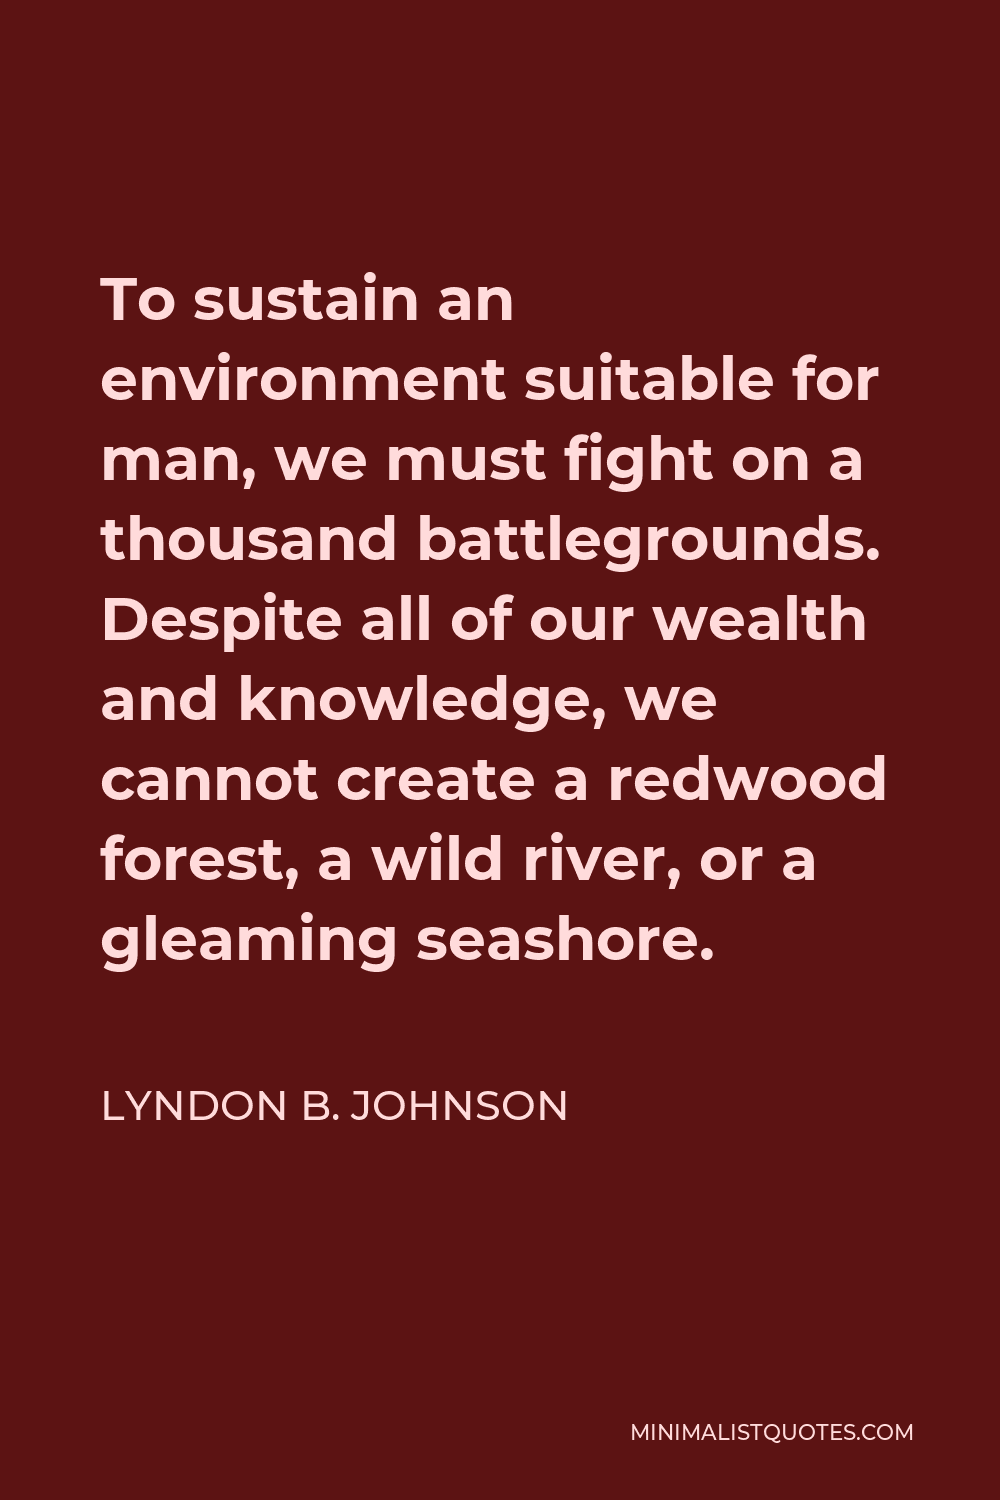 Lyndon B. Johnson Quote - To sustain an environment suitable for man, we must fight on a thousand battlegrounds. Despite all of our wealth and knowledge, we cannot create a redwood forest, a wild river, or a gleaming seashore.